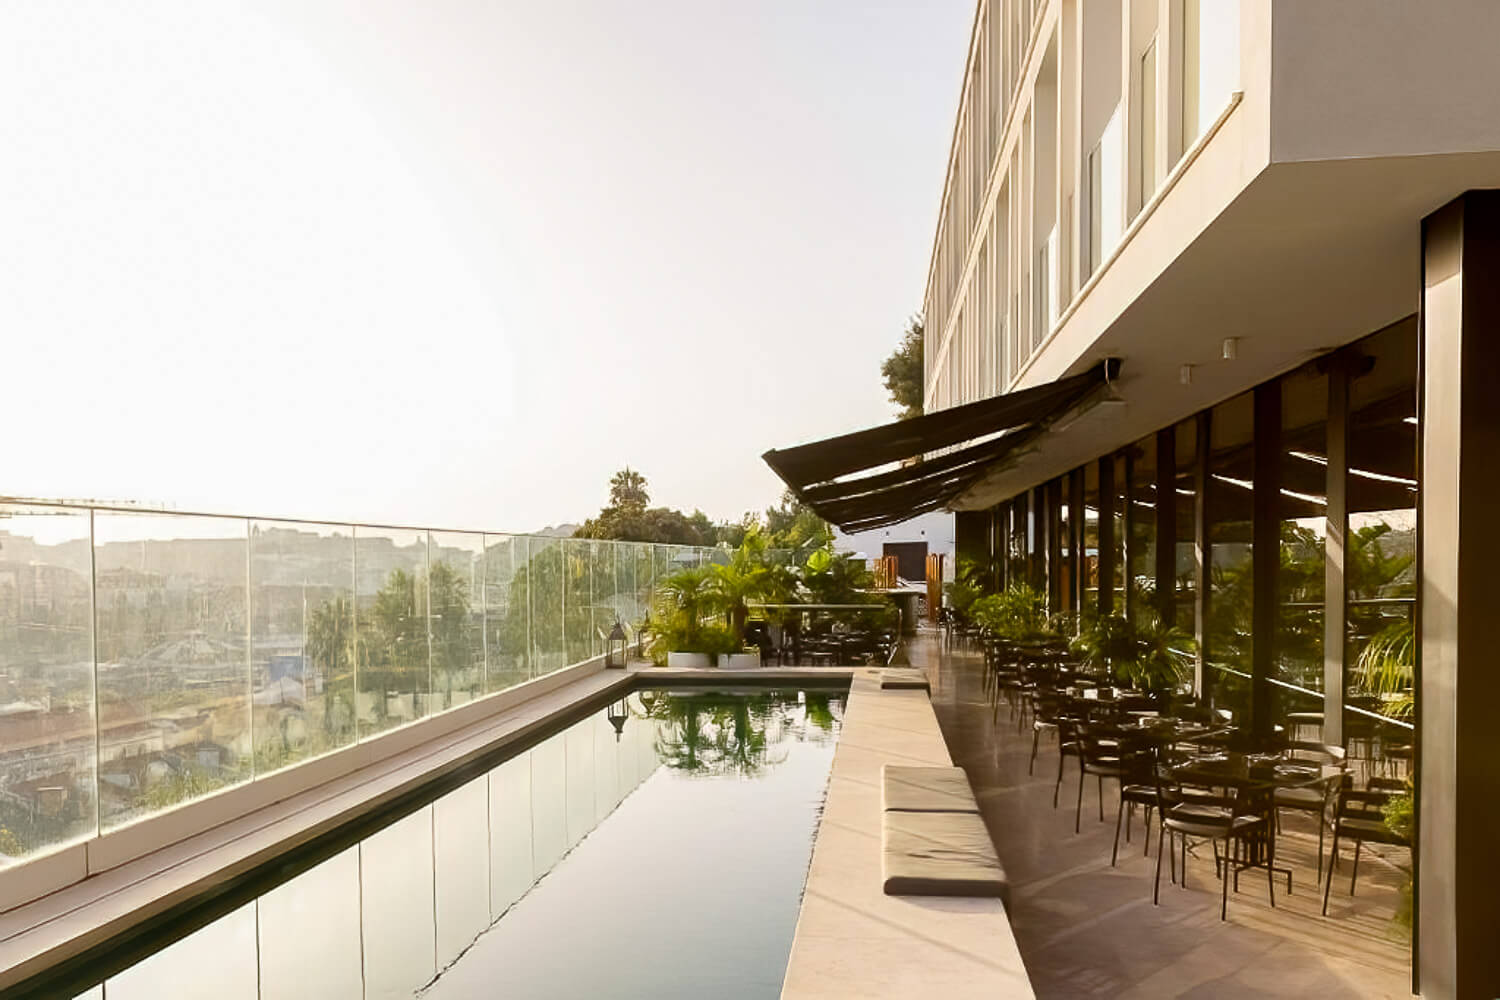 Memmo Principe Real Hotel in Lisbon, one of the best luxury hotels in Lisbon